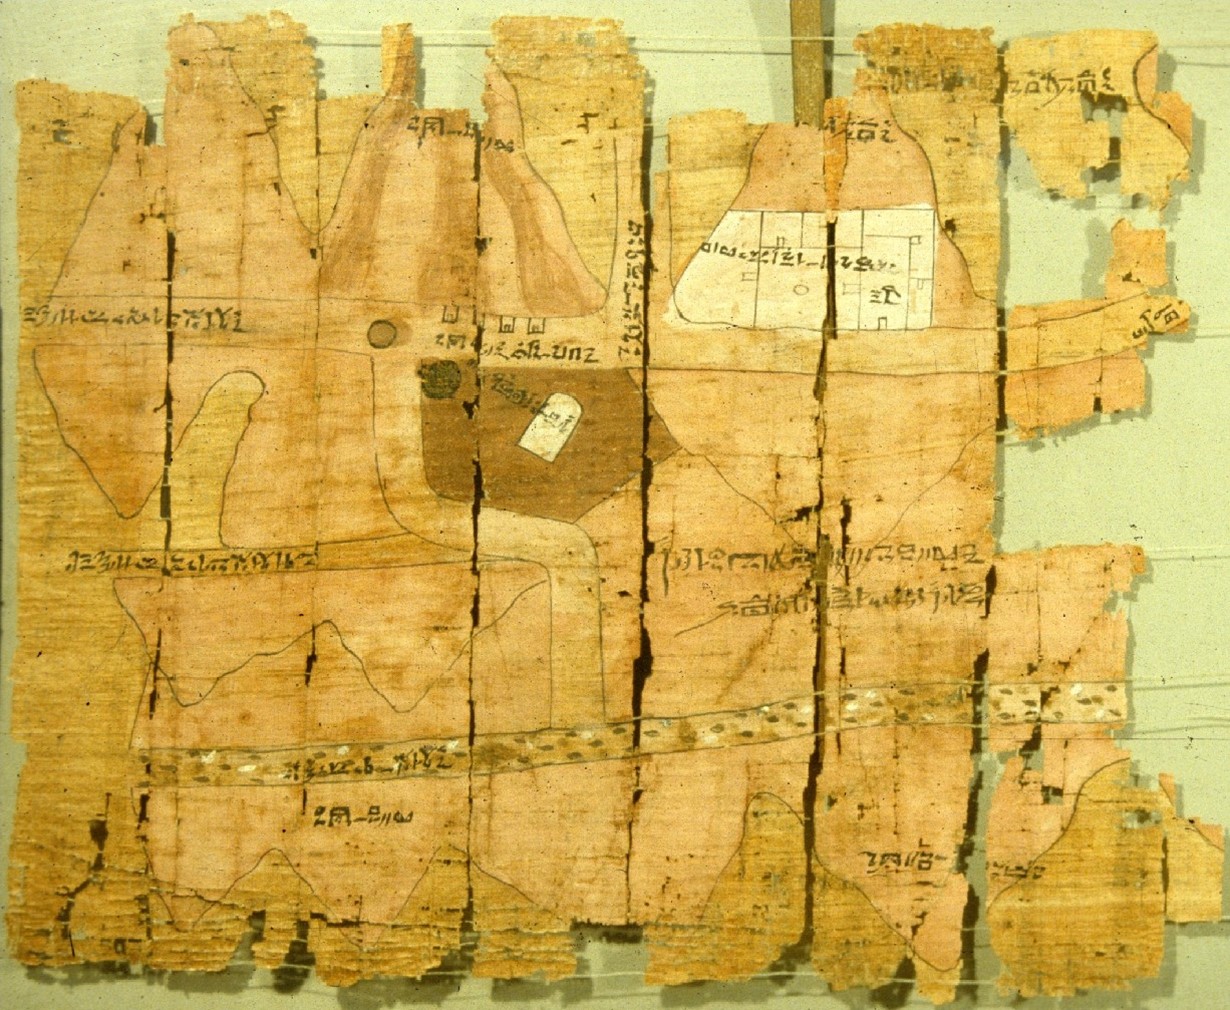 The left end of the Turin papyrus